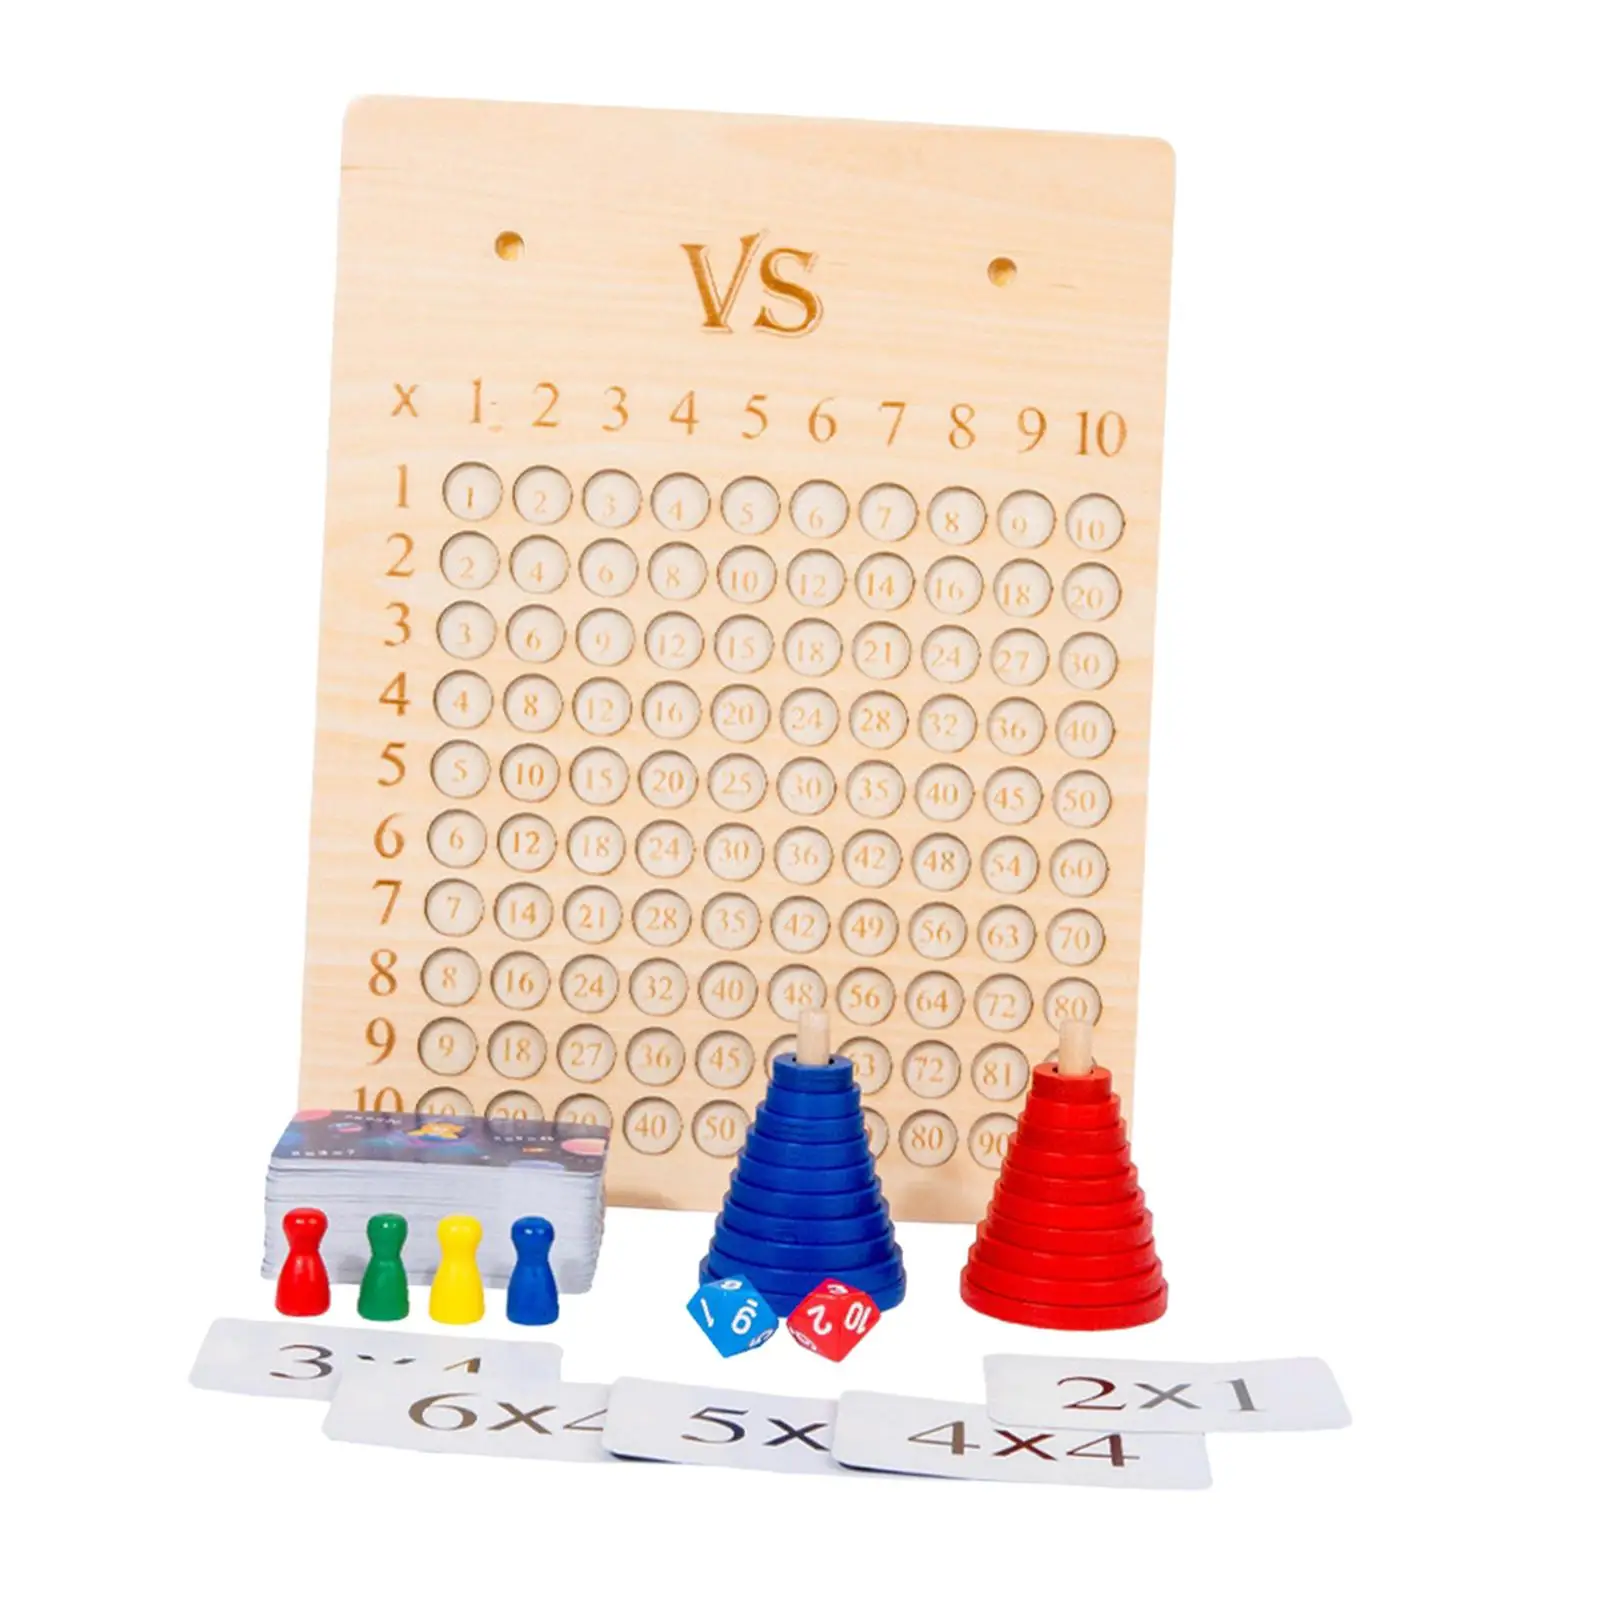 Montessori Multiplication Table Math Toy Blocks Board Educational Game Arithmetic Teaching Aids Wooden for Children Gift Kids